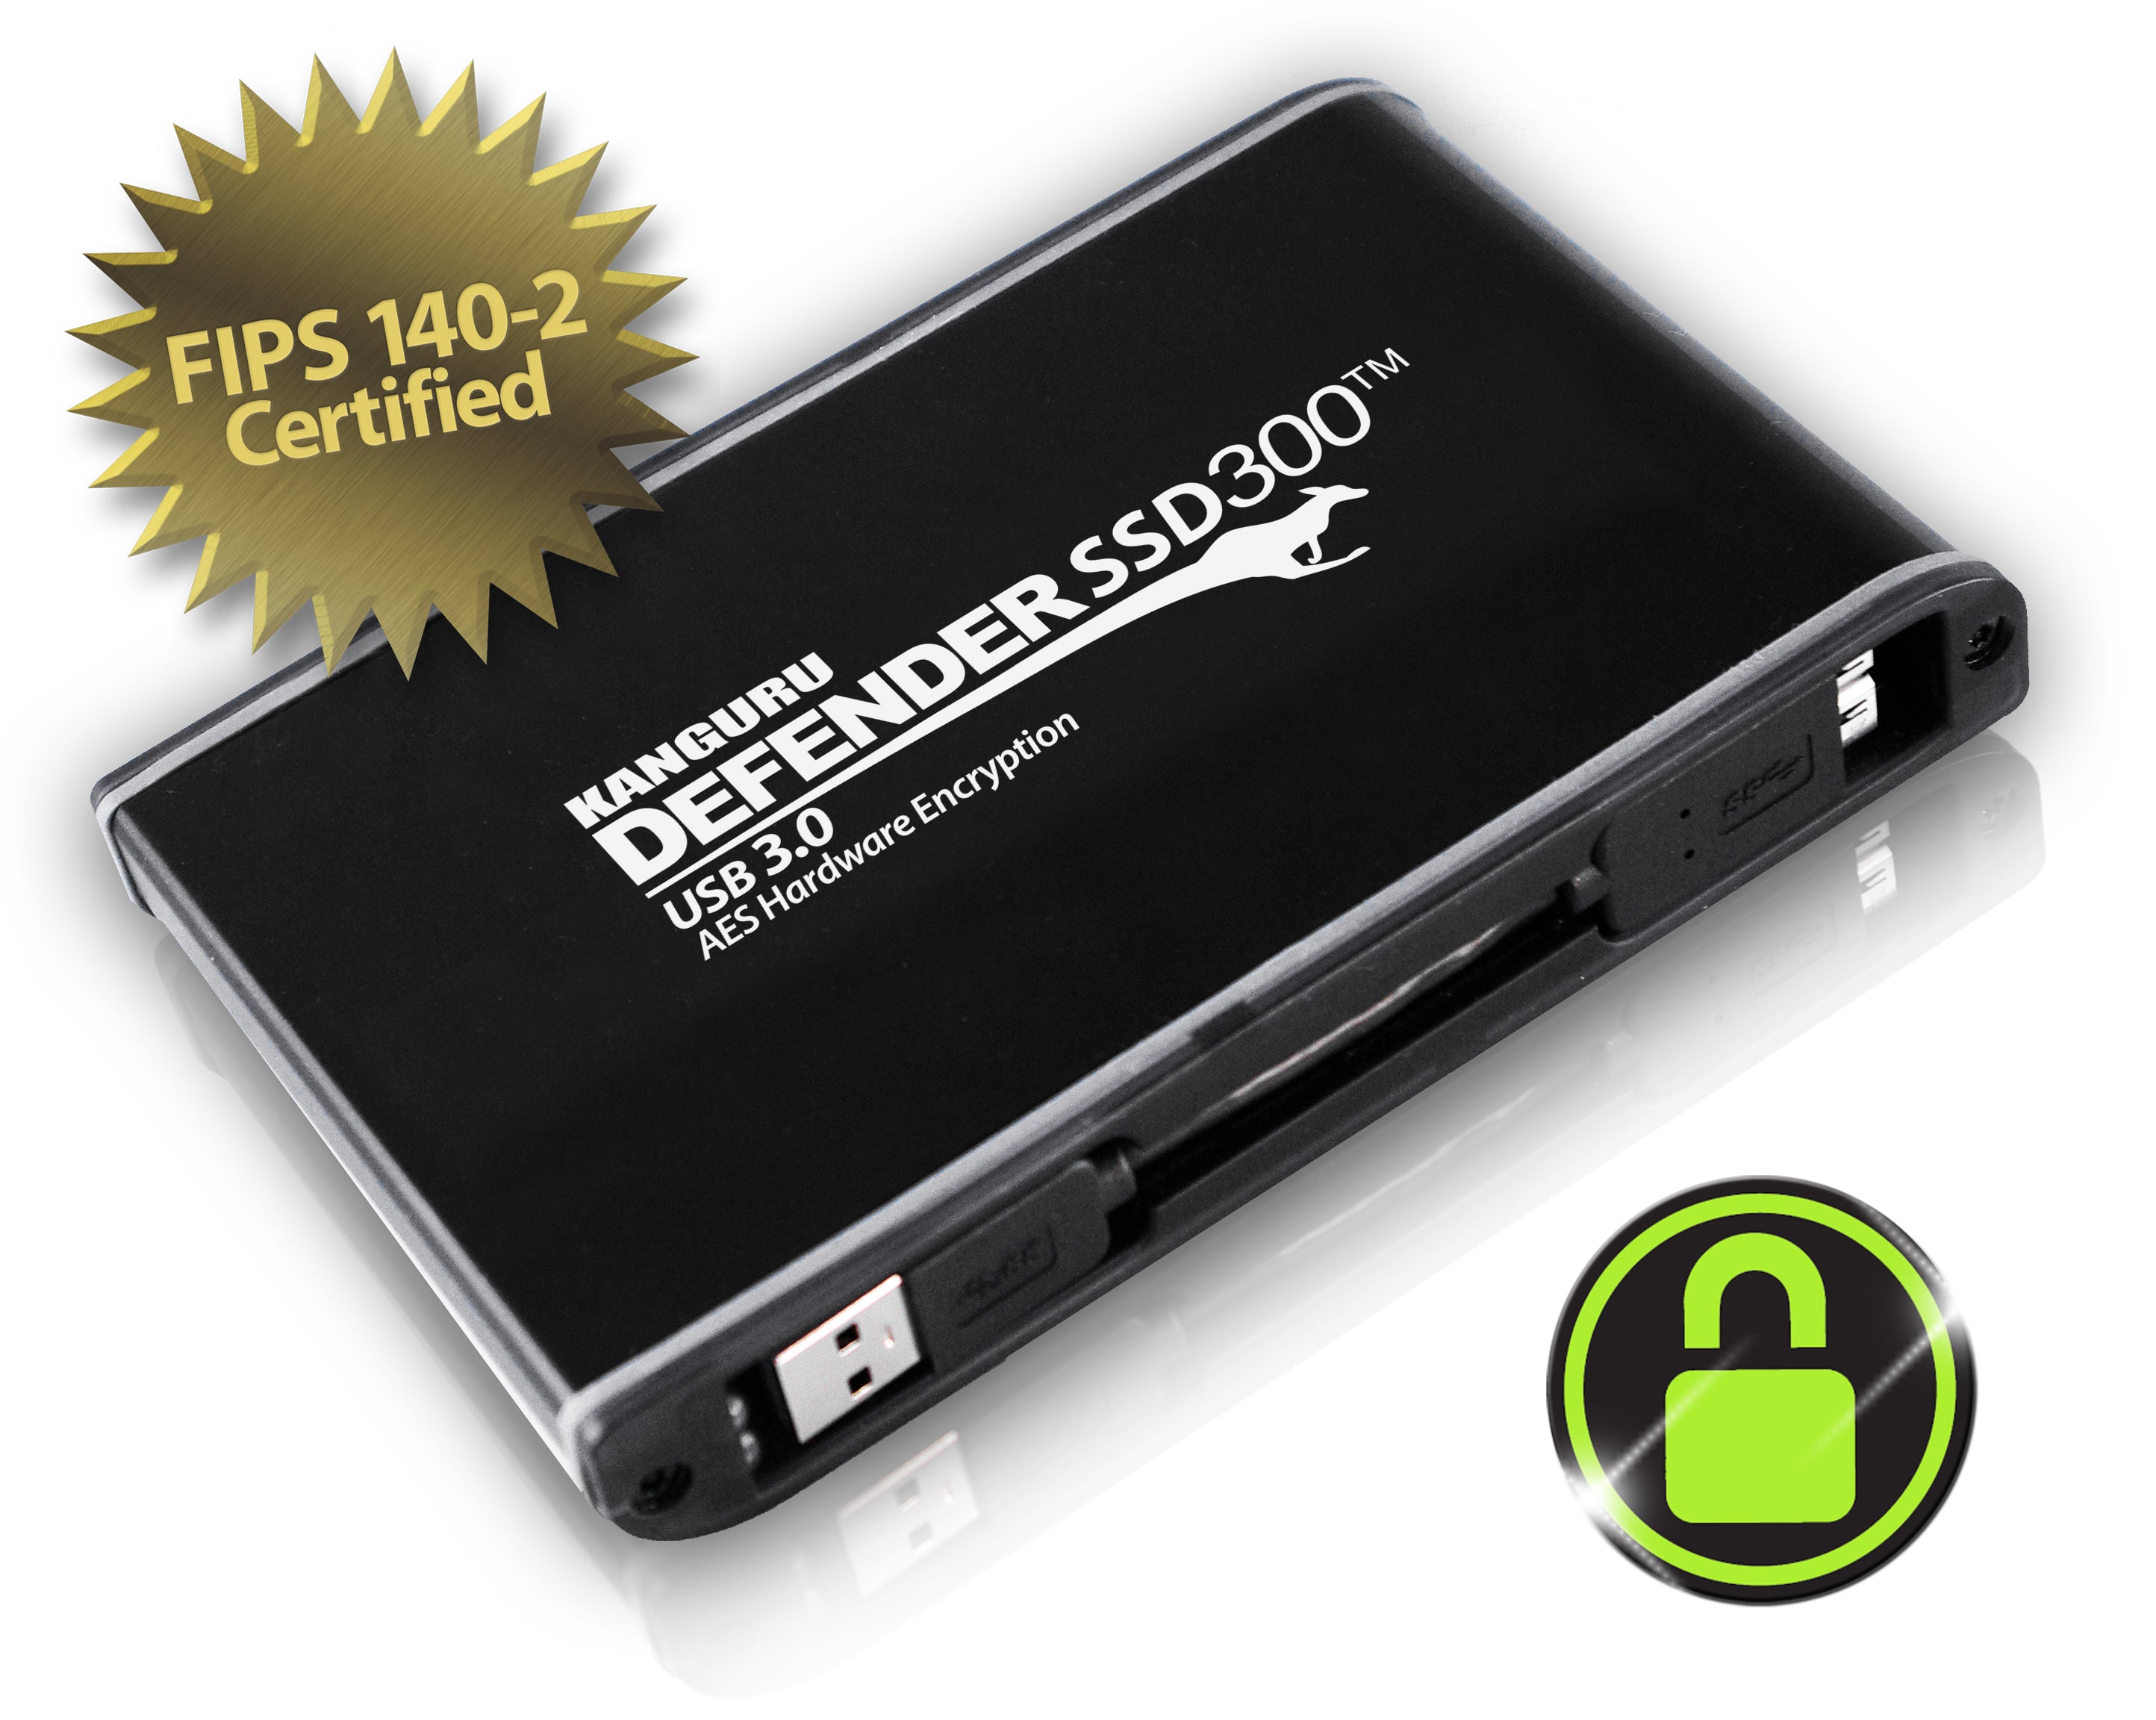 Kanguru FIPS 140-2 Certified, Encrypted SSD Provides Robust Data Security for High-Security Organizations